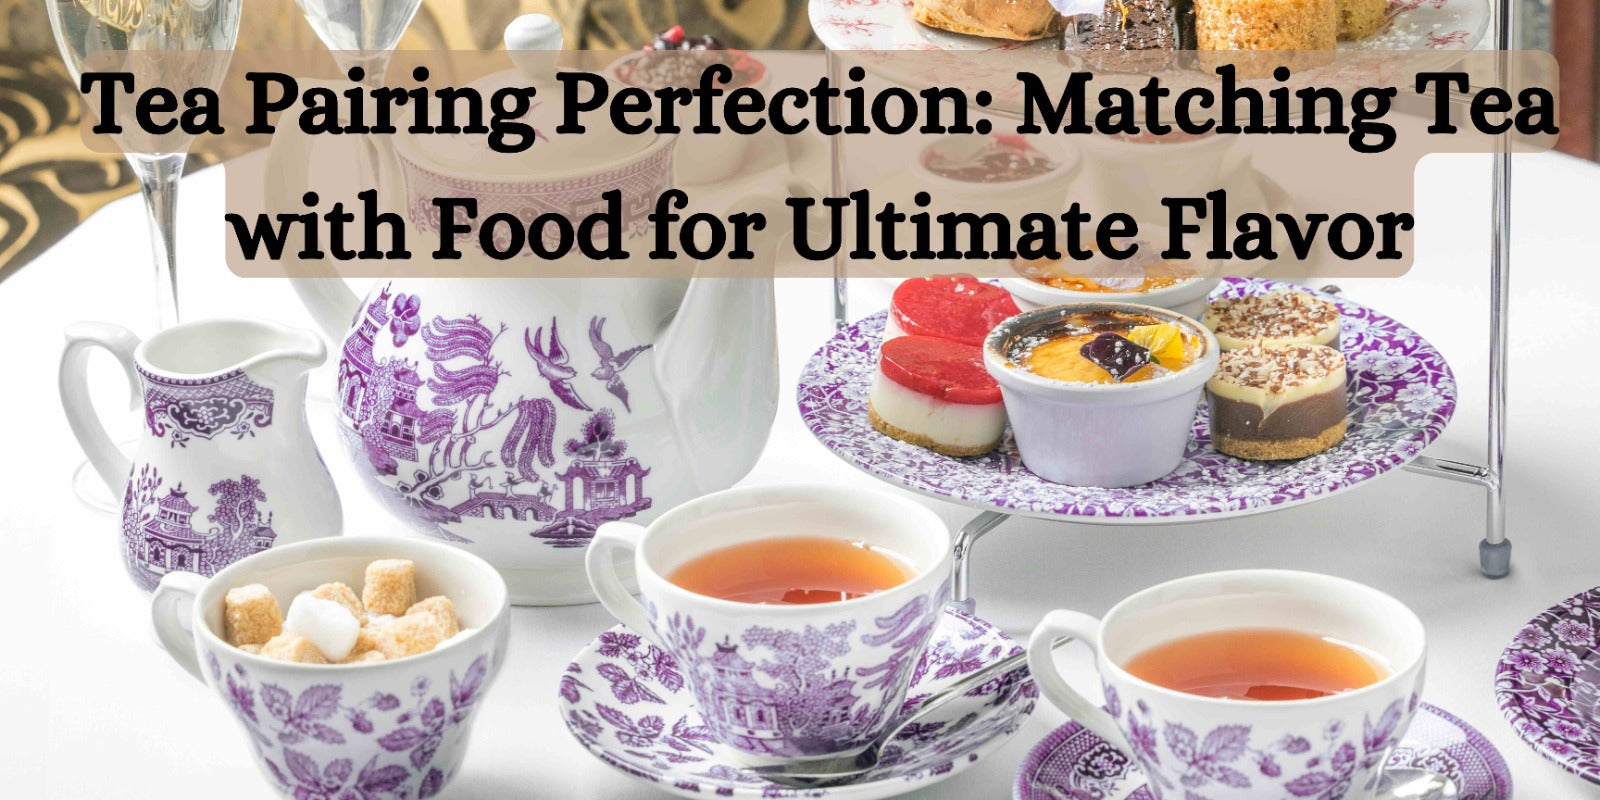 Tea Pairing Perfection: Matching Tea with Food for Ultimate Flavor